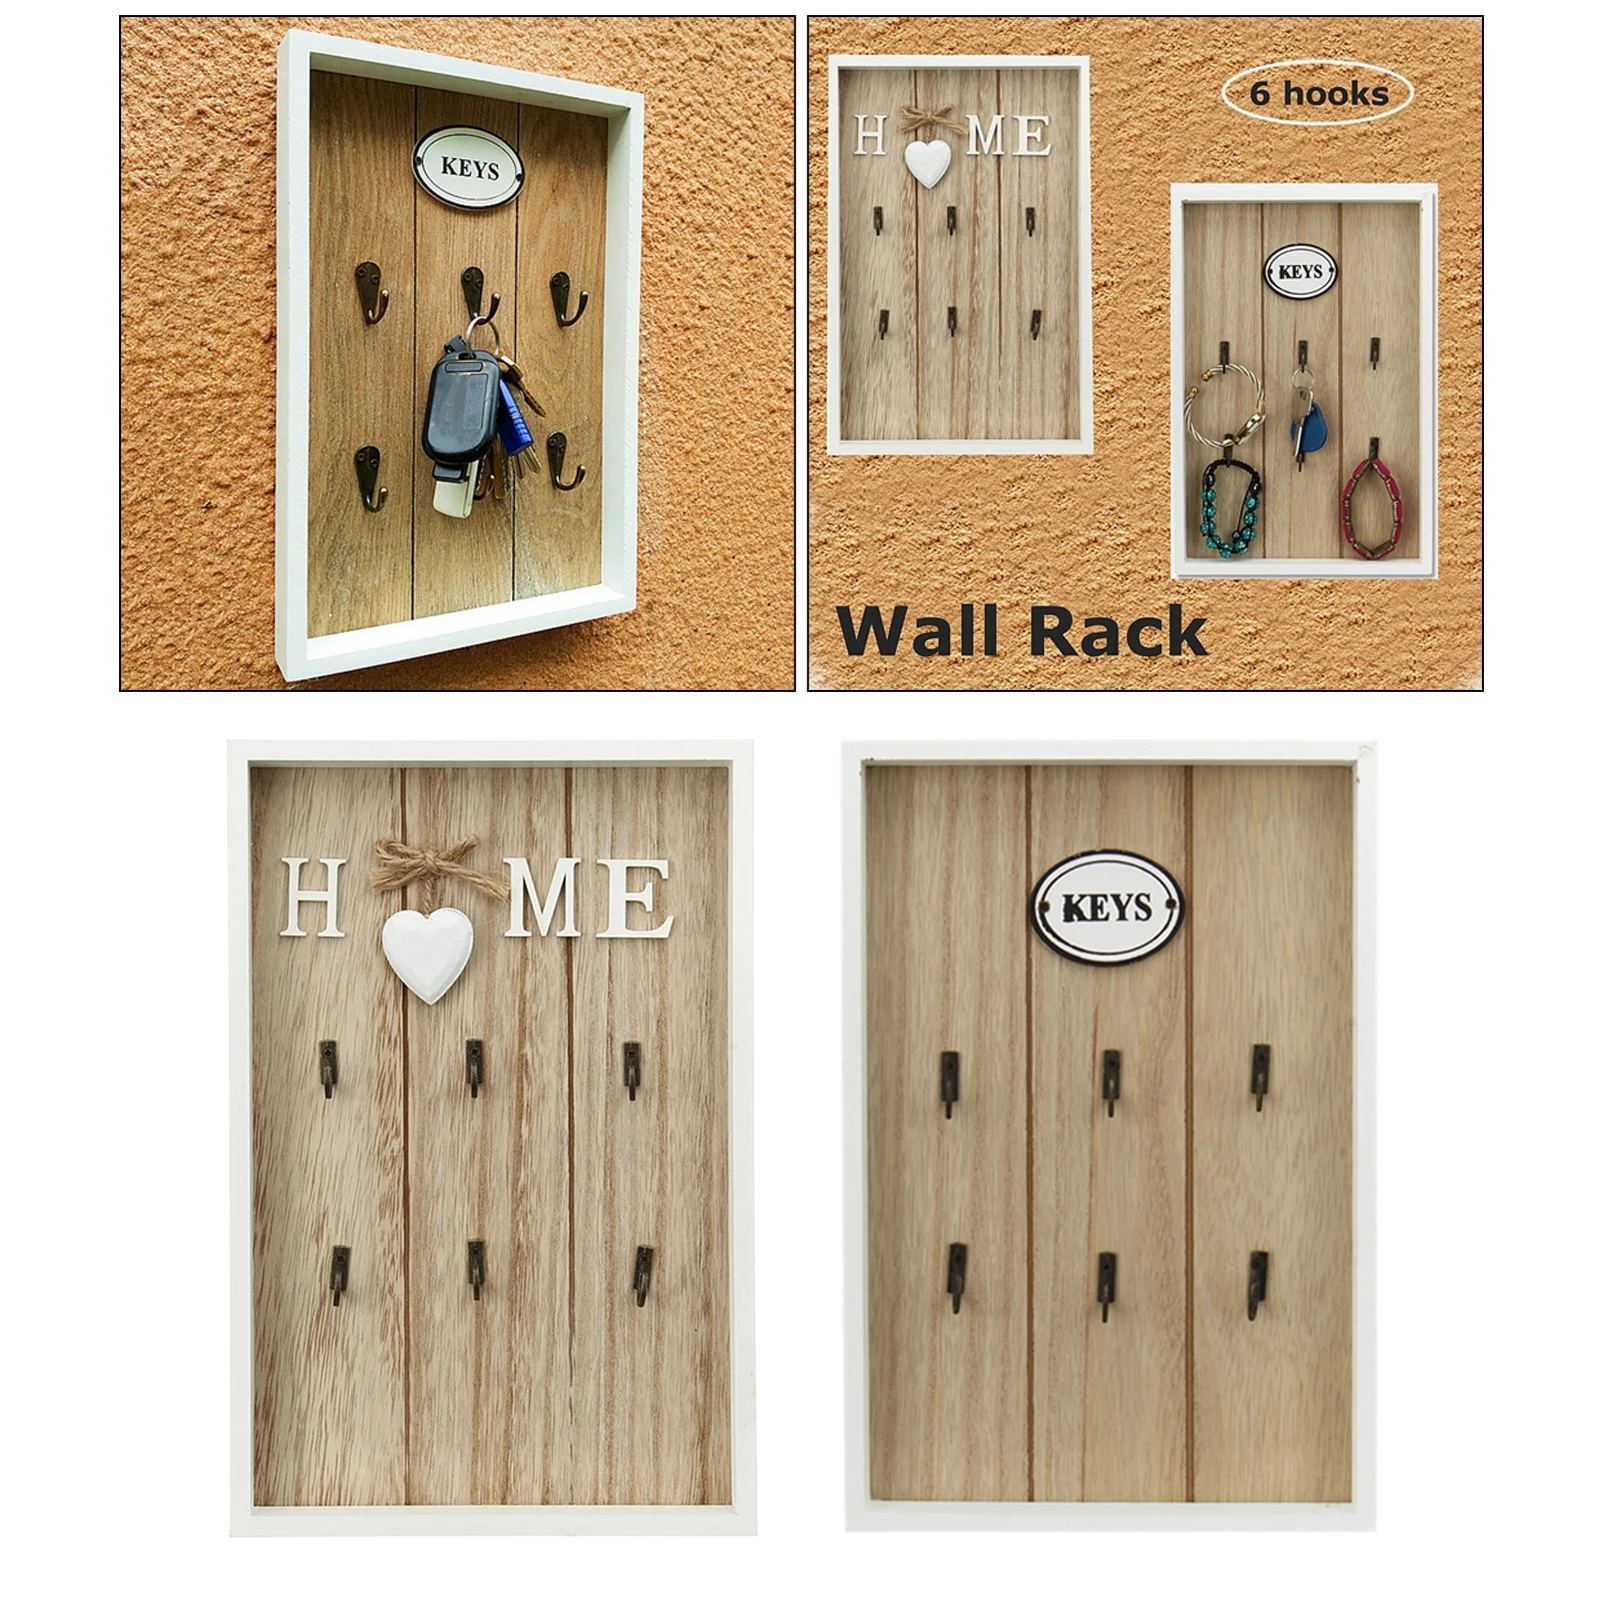 Details about   Brown Home Theme Wooden Key Holder Wall Mounted Key Organizer 6 Hooks 